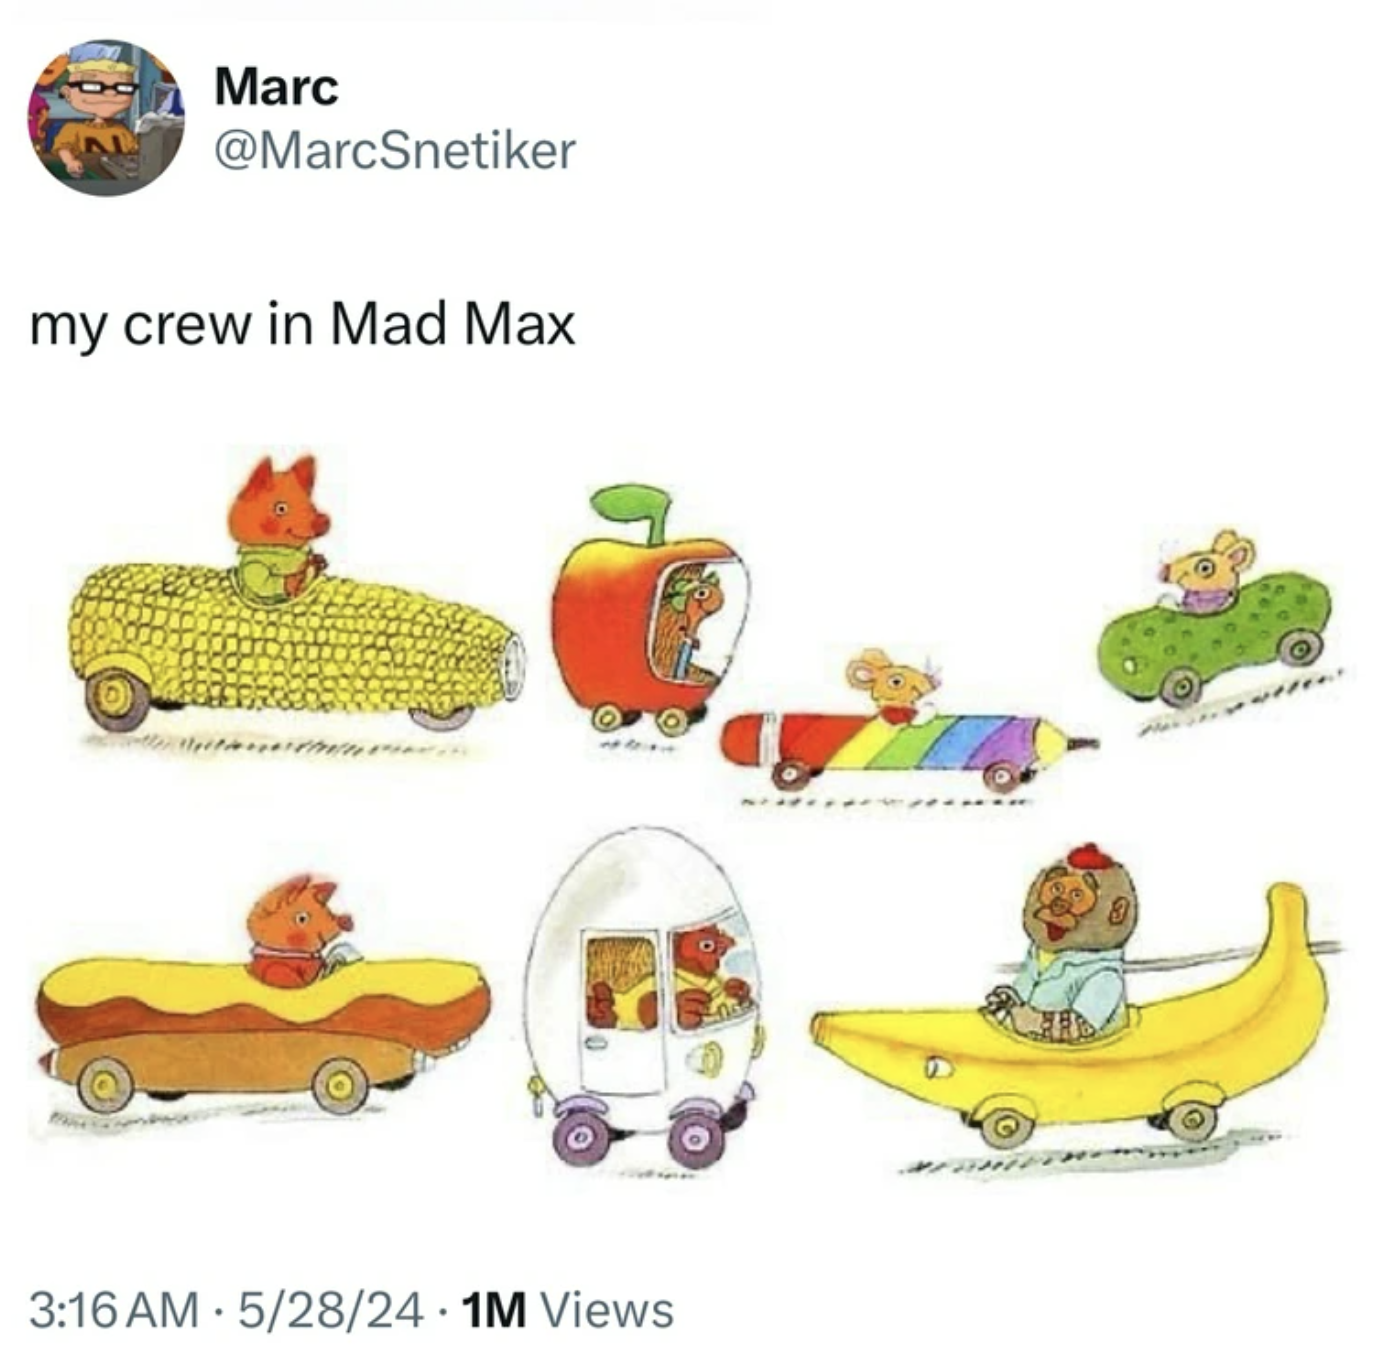 illustration richard scarry - Marc my crew in Mad Max 52824.1M Views